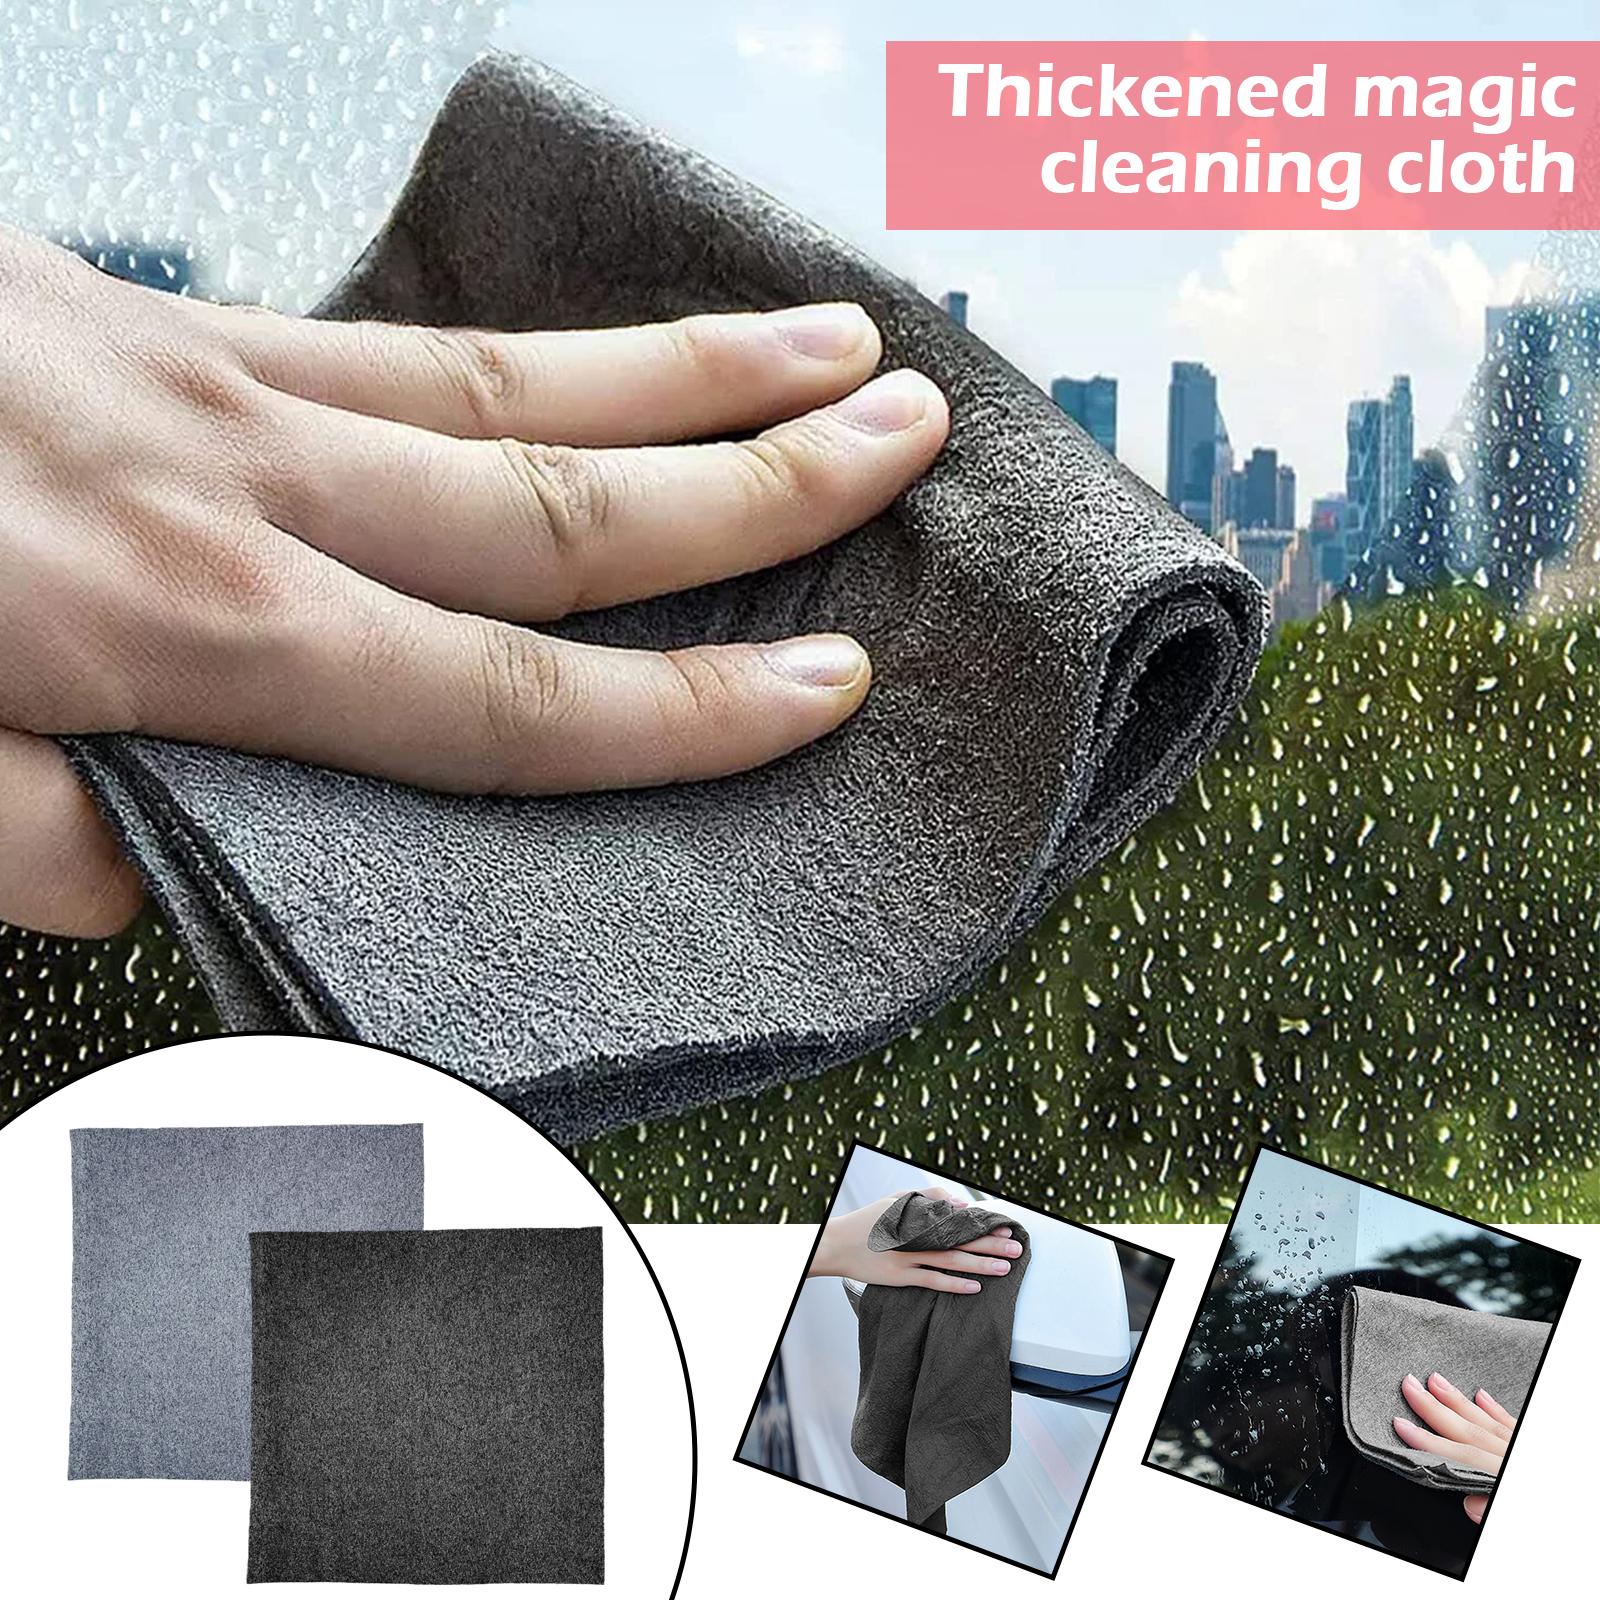 (🌲Hot Sale- SAVE 48% OFF) Thickened Magic Cleaning Cloth - BUY 5 GET 5 FREE(30 PCS & FREE SHIPPING NOW!)